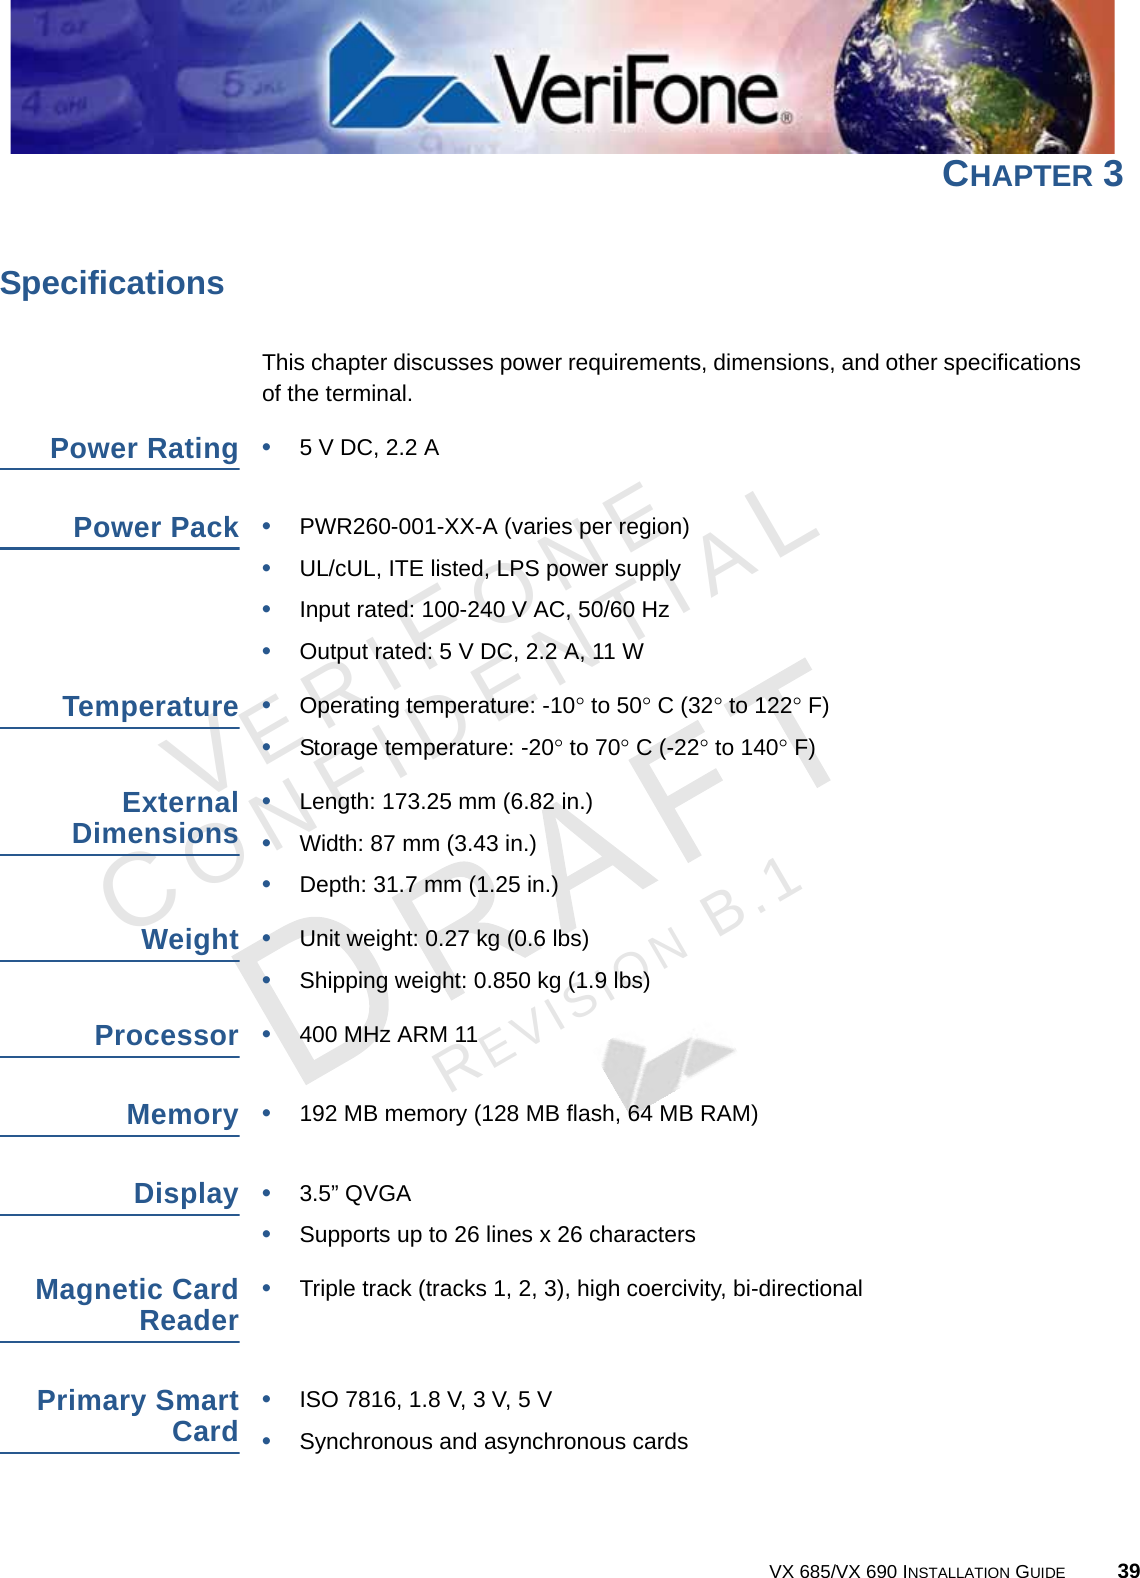 VERIFONECONFIDENTIALREVISION B.1 VX 685/VX 690 INSTALLATION GUIDE 39CHAPTER 3SpecificationsThis chapter discusses power requirements, dimensions, and other specifications of the terminal.Power Rating•5 V DC, 2.2 APower Pack•PWR260-001-XX-A (varies per region)•UL/cUL, ITE listed, LPS power supply•Input rated: 100-240 V AC, 50/60 Hz•Output rated: 5 V DC, 2.2 A, 11 WTemperature•Operating temperature: -10 to 50 C (32 to 122 F)•Storage temperature: -20 to 70 C (-22 to 140 F)ExternalDimensions•Length: 173.25 mm (6.82 in.)•Width: 87 mm (3.43 in.)•Depth: 31.7 mm (1.25 in.)Weight•Unit weight: 0.27 kg (0.6 lbs)•Shipping weight: 0.850 kg (1.9 lbs)Processor•400 MHz ARM 11Memory•192 MB memory (128 MB flash, 64 MB RAM)Display•3.5” QVGA•Supports up to 26 lines x 26 charactersMagnetic CardReader•Triple track (tracks 1, 2, 3), high coercivity, bi-directionalPrimary SmartCard•ISO 7816, 1.8 V, 3 V, 5 V •Synchronous and asynchronous cards 